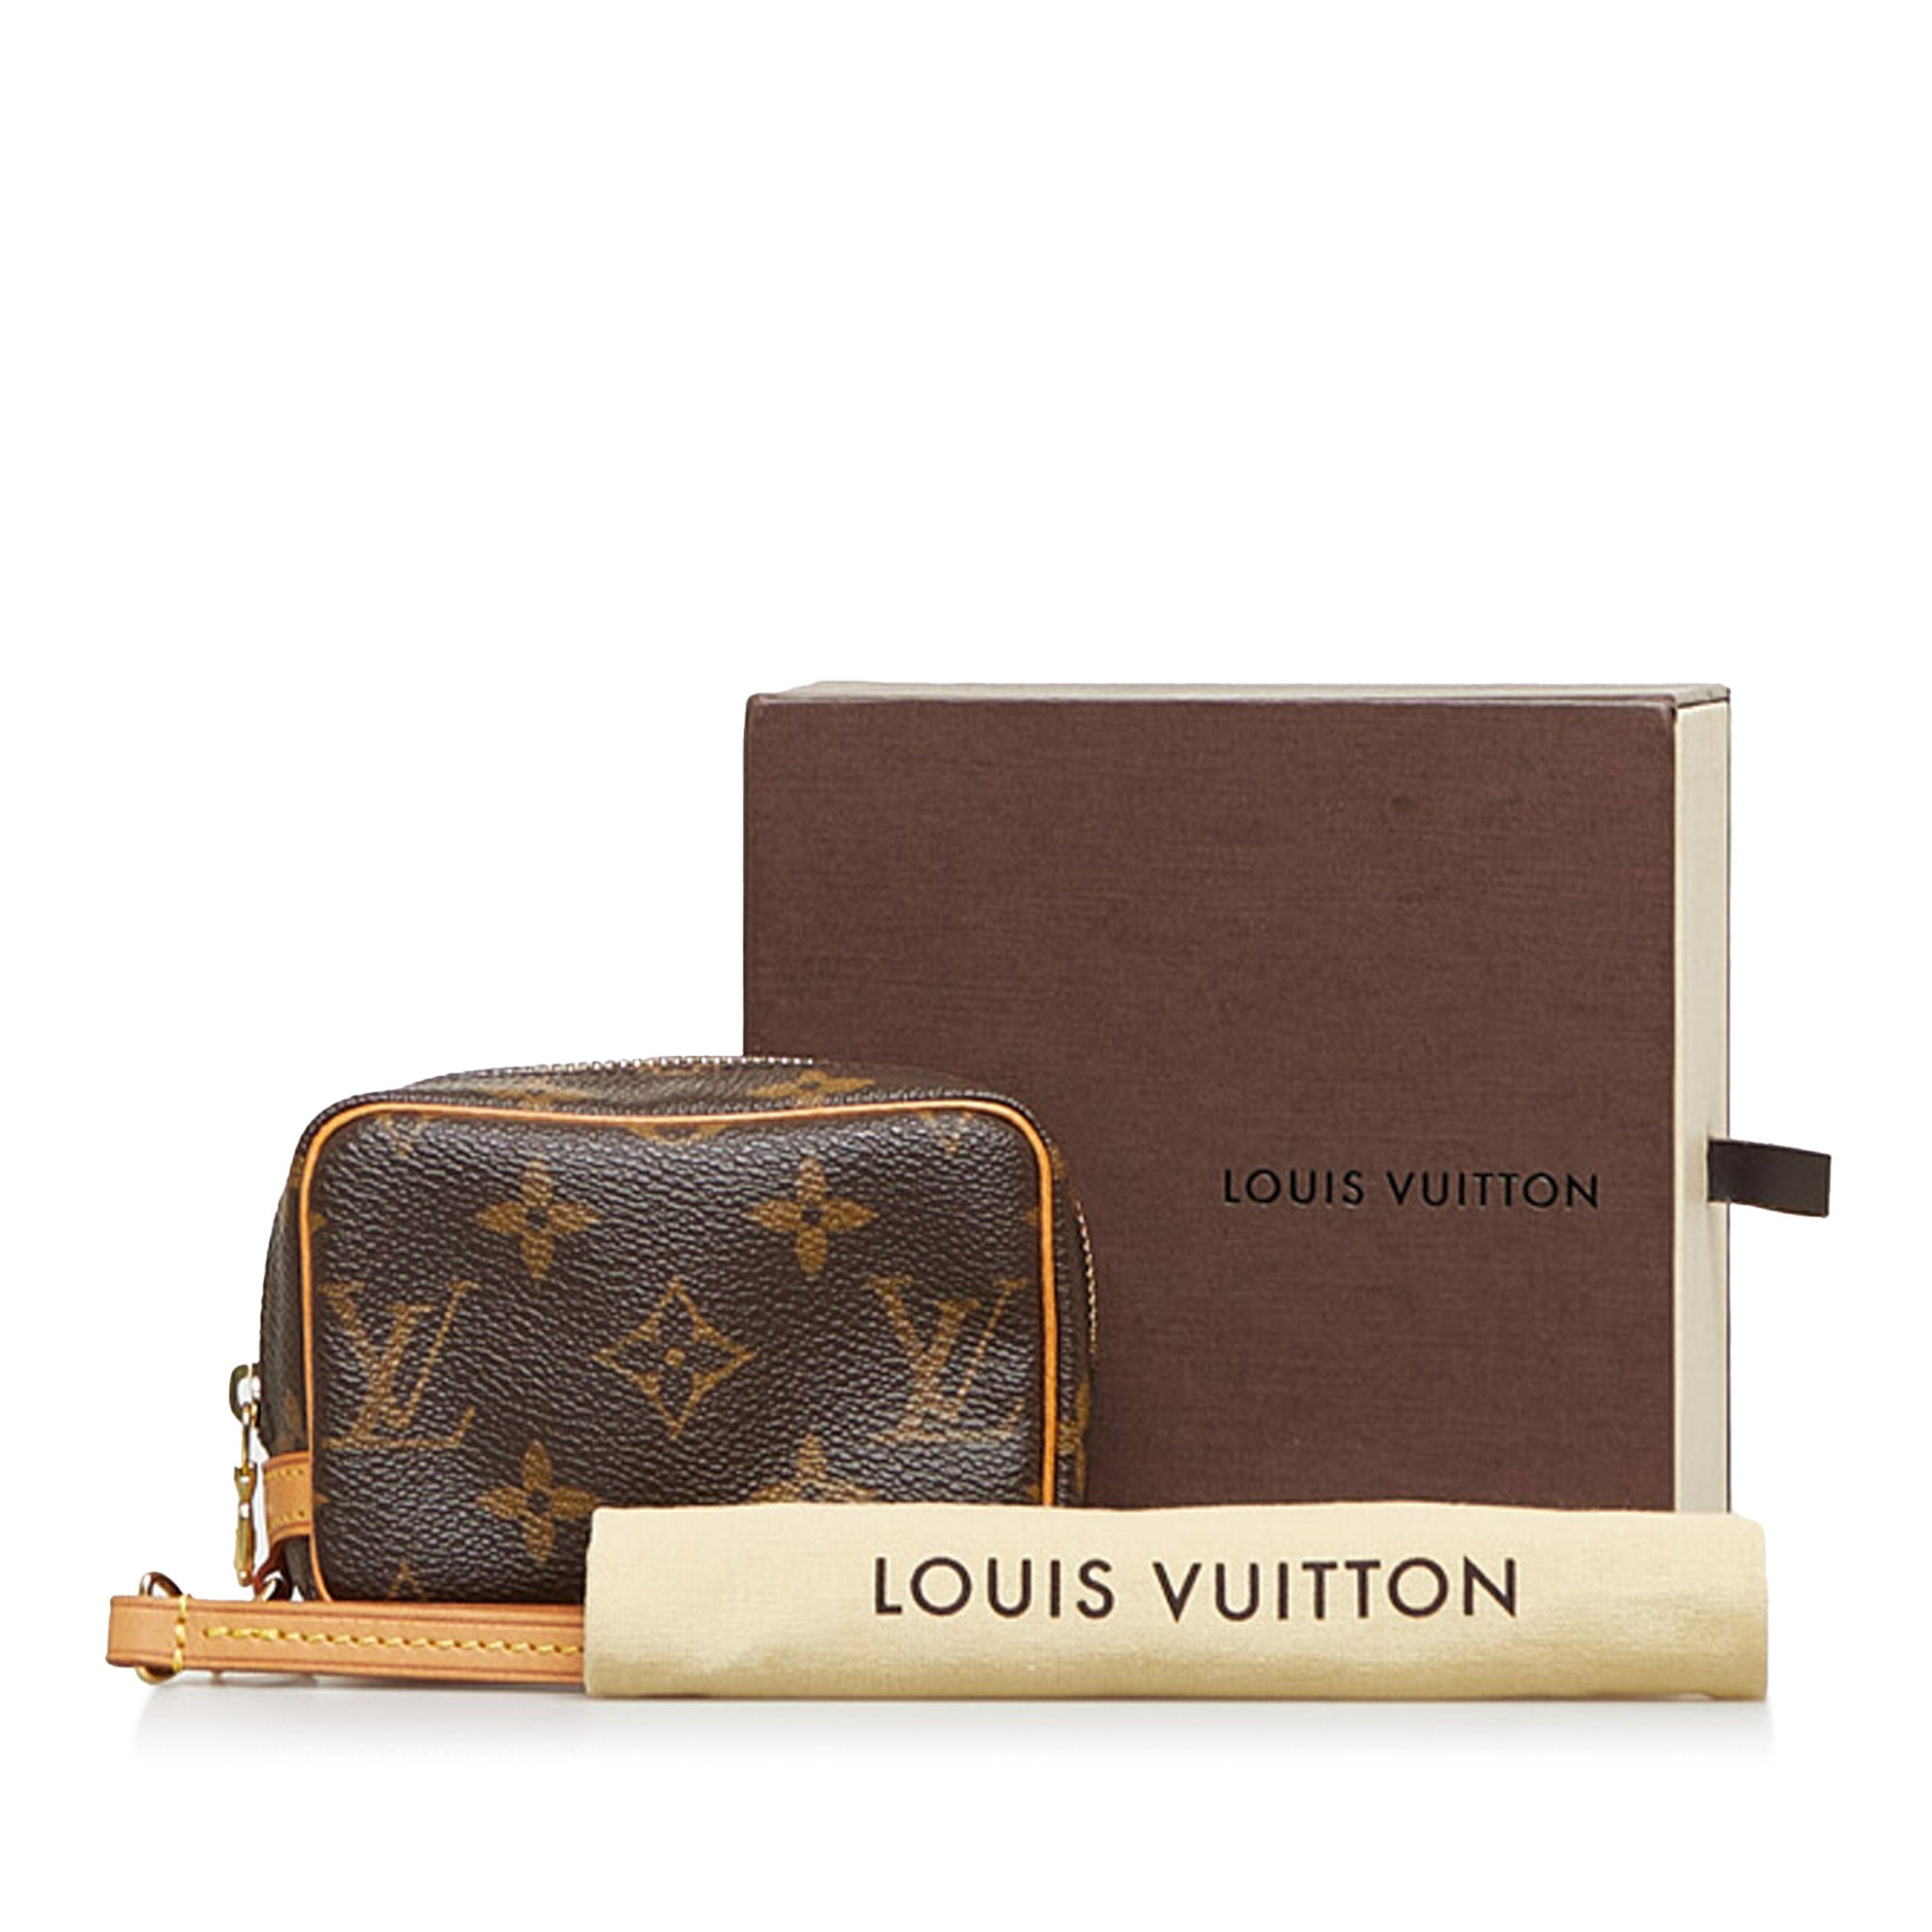 Louis Vuitton Monogram Trousse Wapity Pouch - Brown Cosmetic Bags,  Accessories - LOU795499